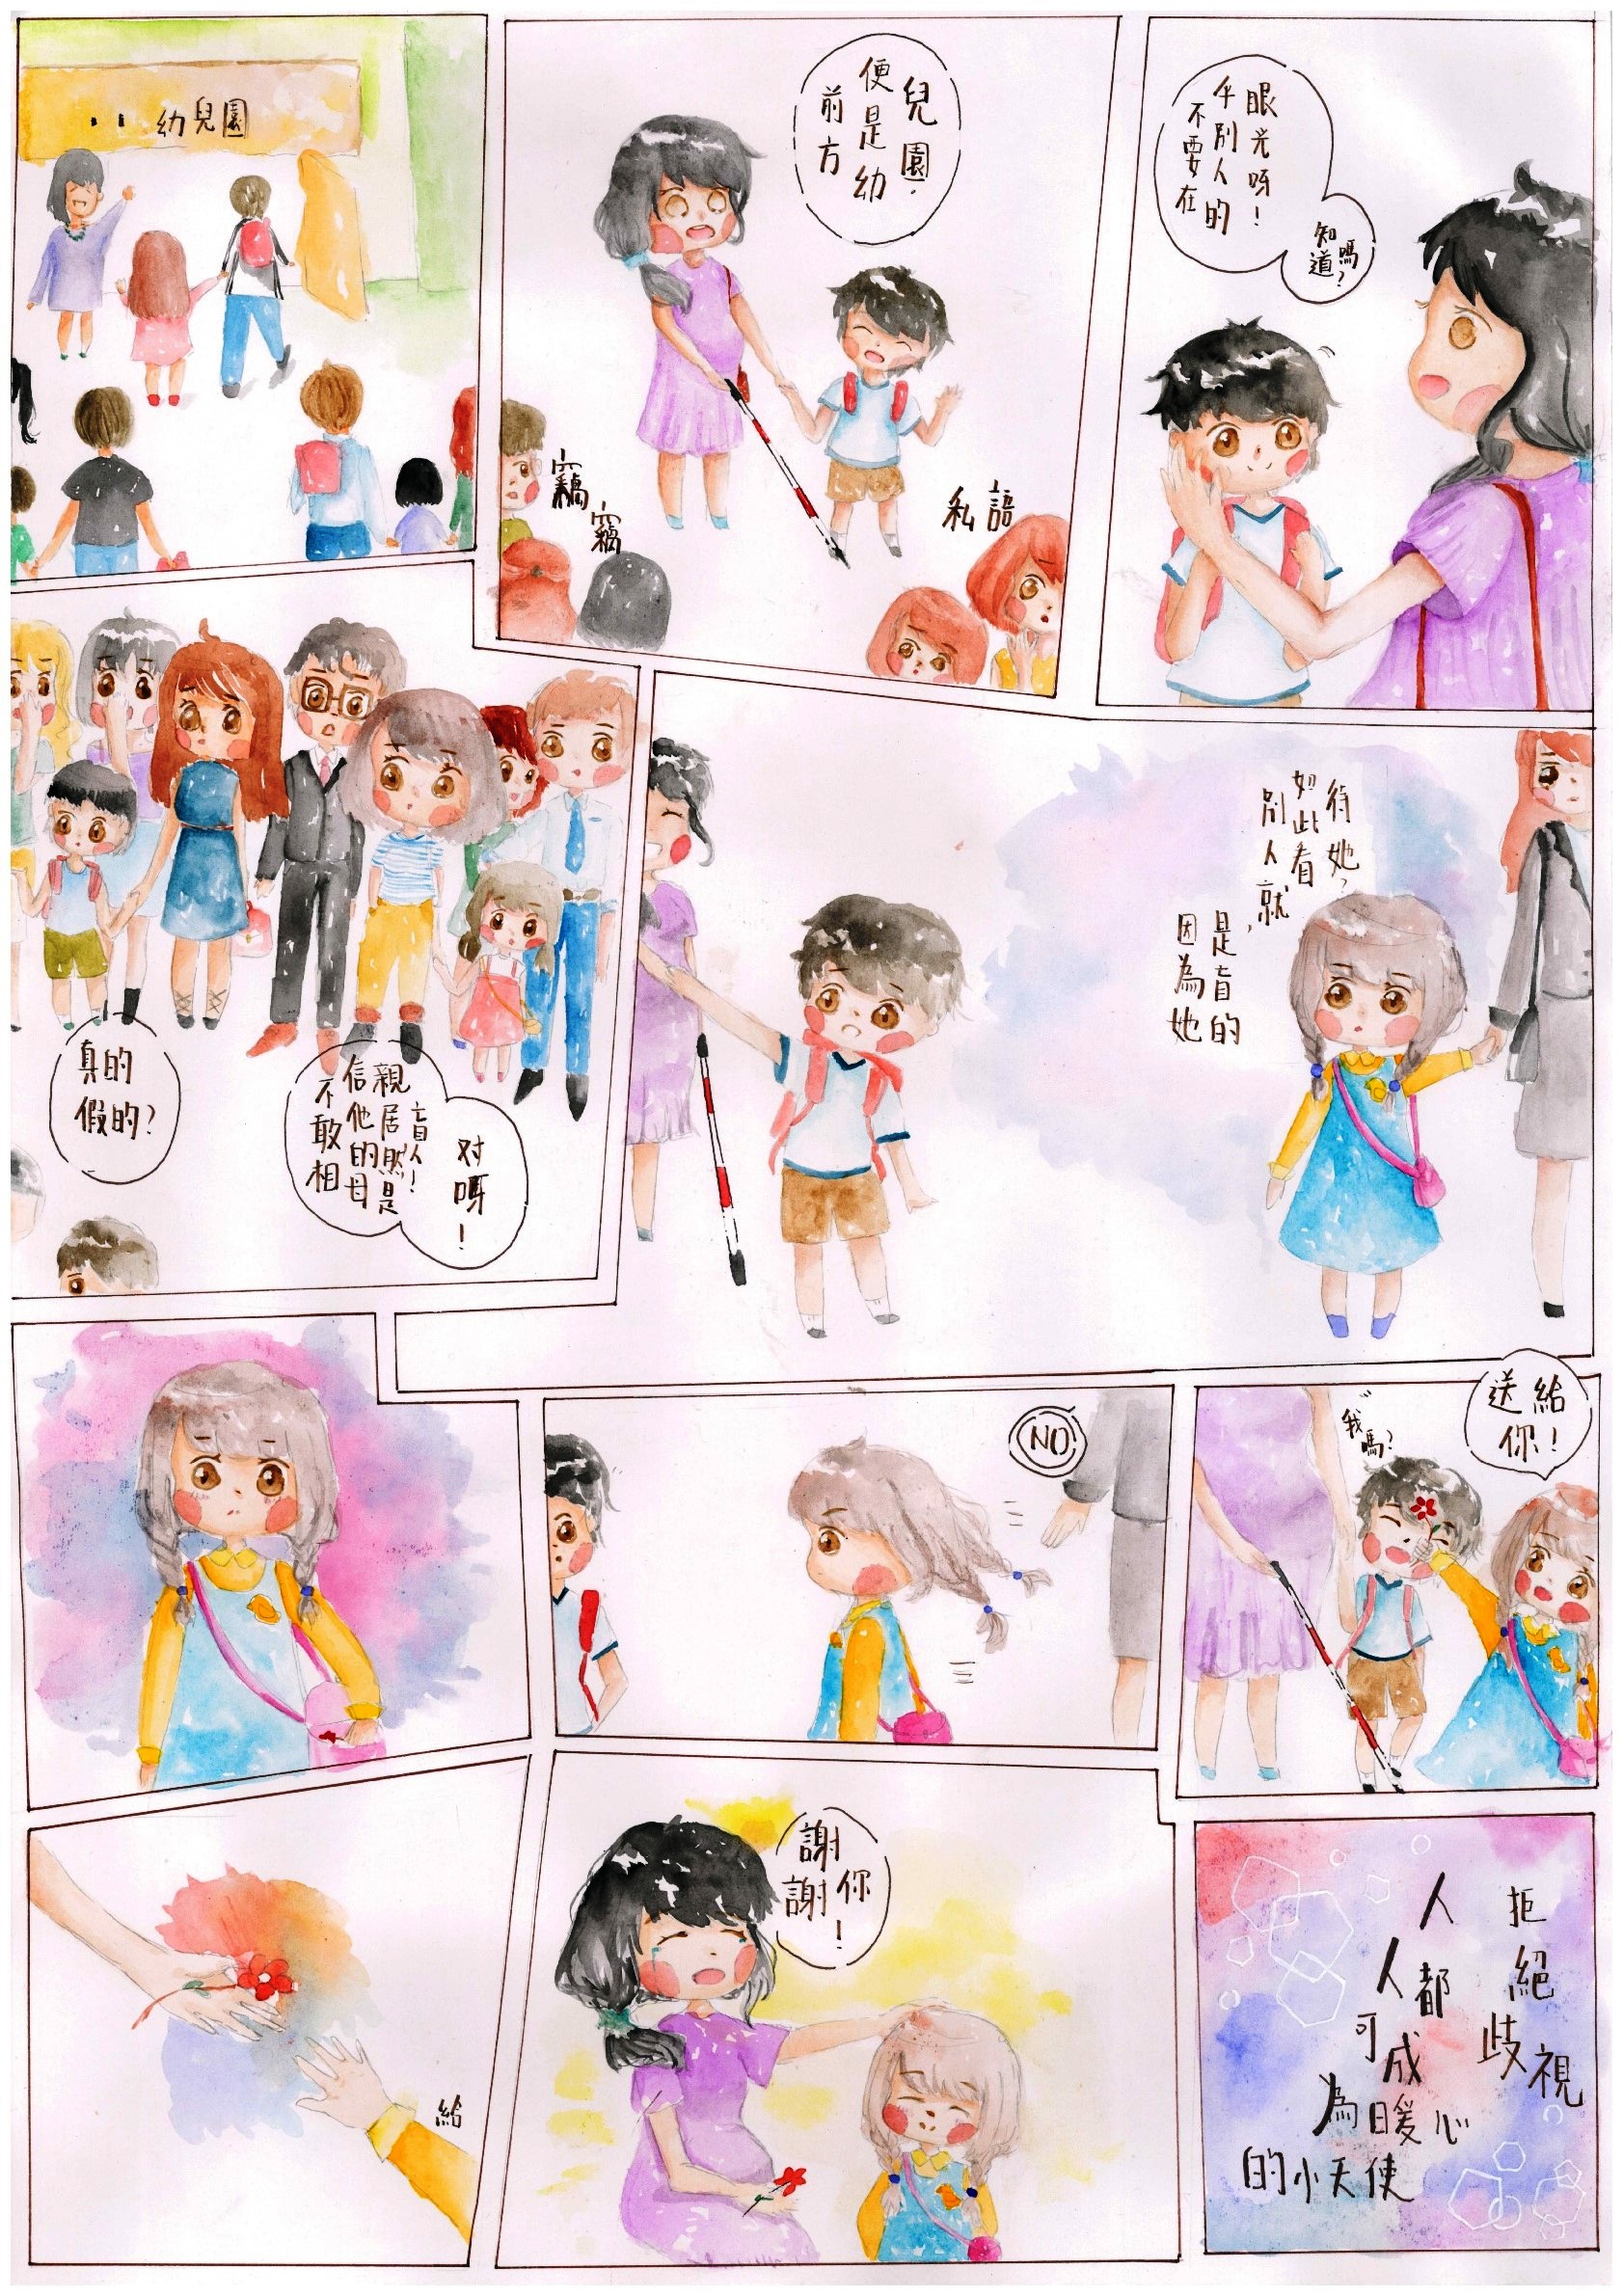 Work of the Champion of the Comics Division, YUEN Ching-nga from Carmel Holy Word Secondary School